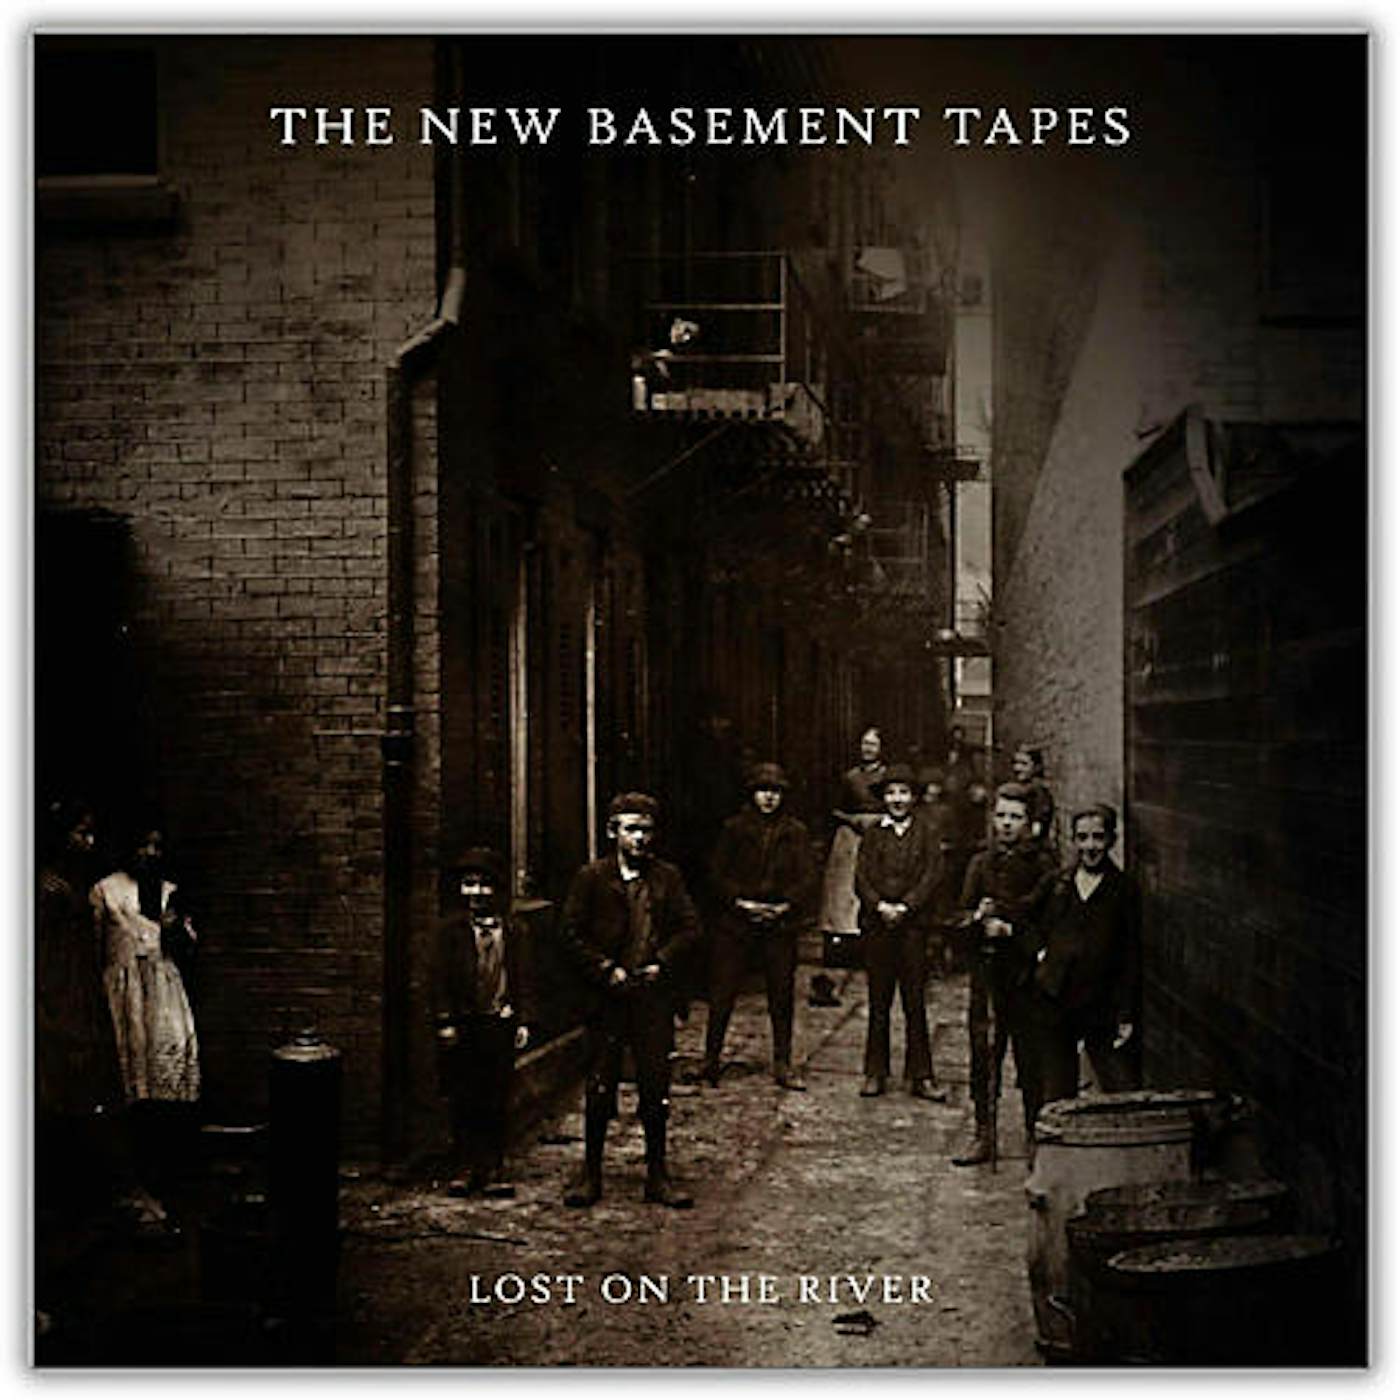 The New Basement Tapes LOST ON THE RIVER Vinyl Record